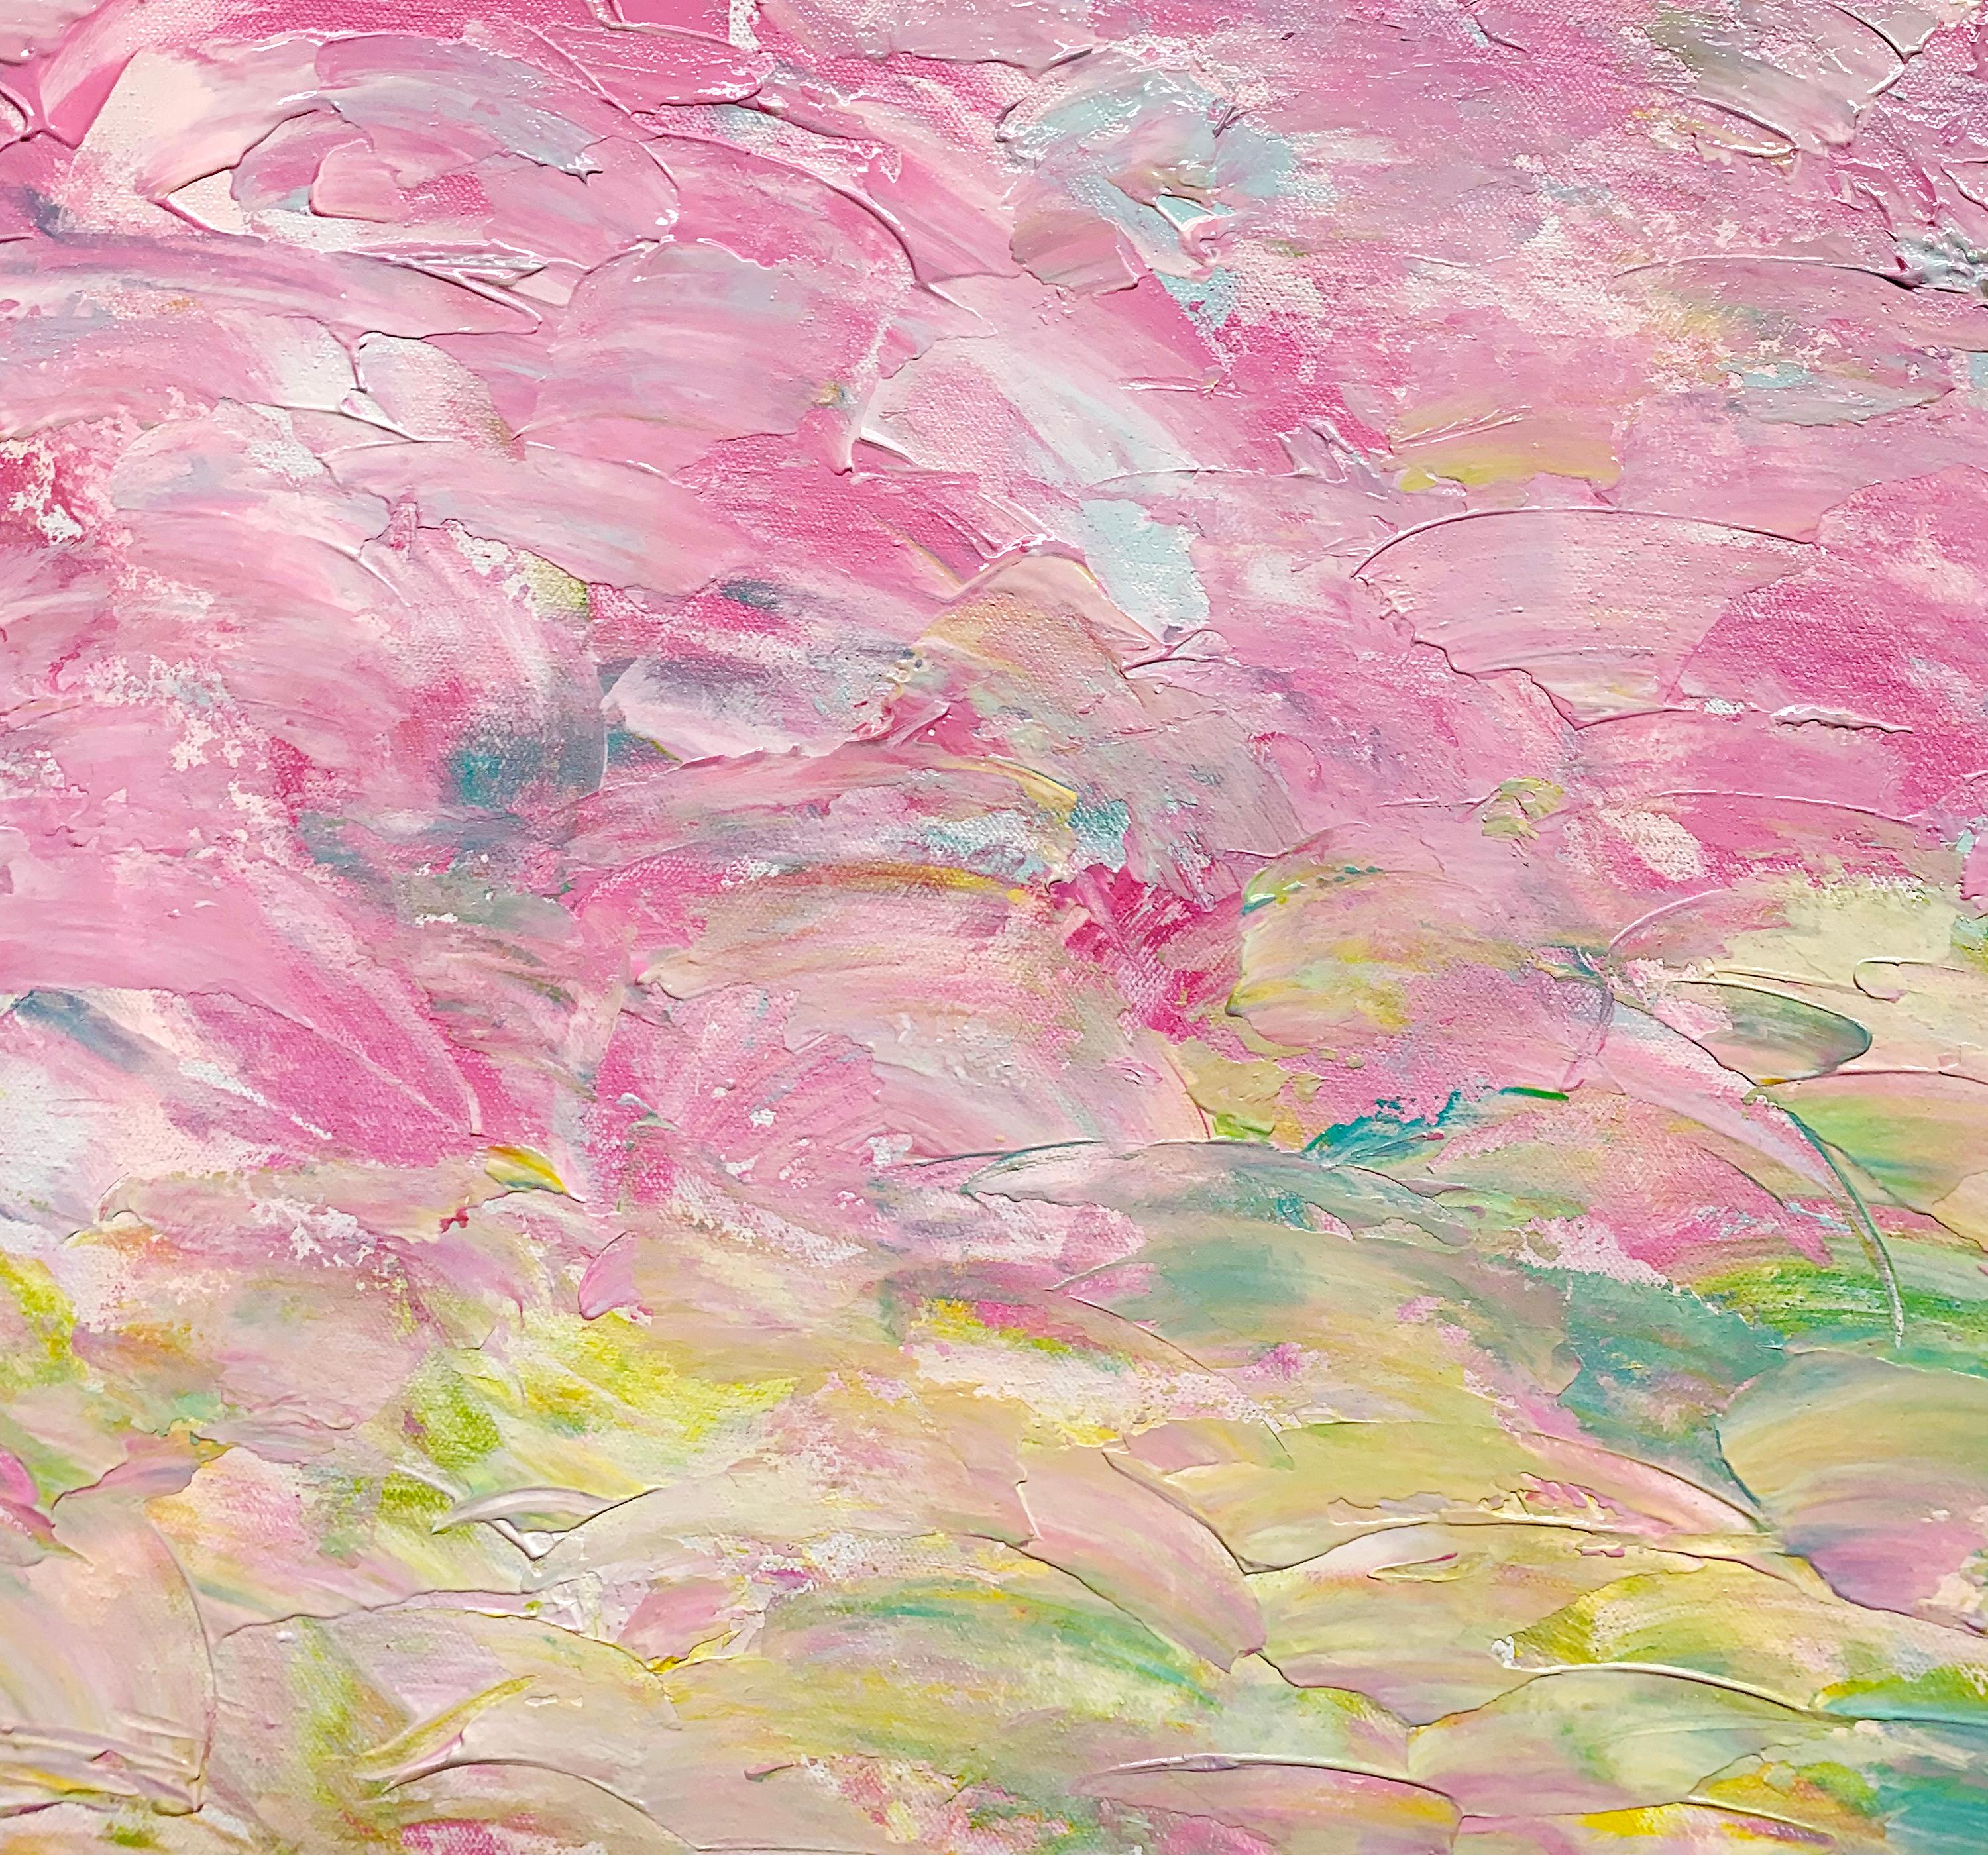 This painting is a mood artwork, where the feeling is being comfortable, so reassured as if somehow the feelings of licking a lollipop as a child have returned. The work is in the style of abstract expressionism.

This artwork is painted on